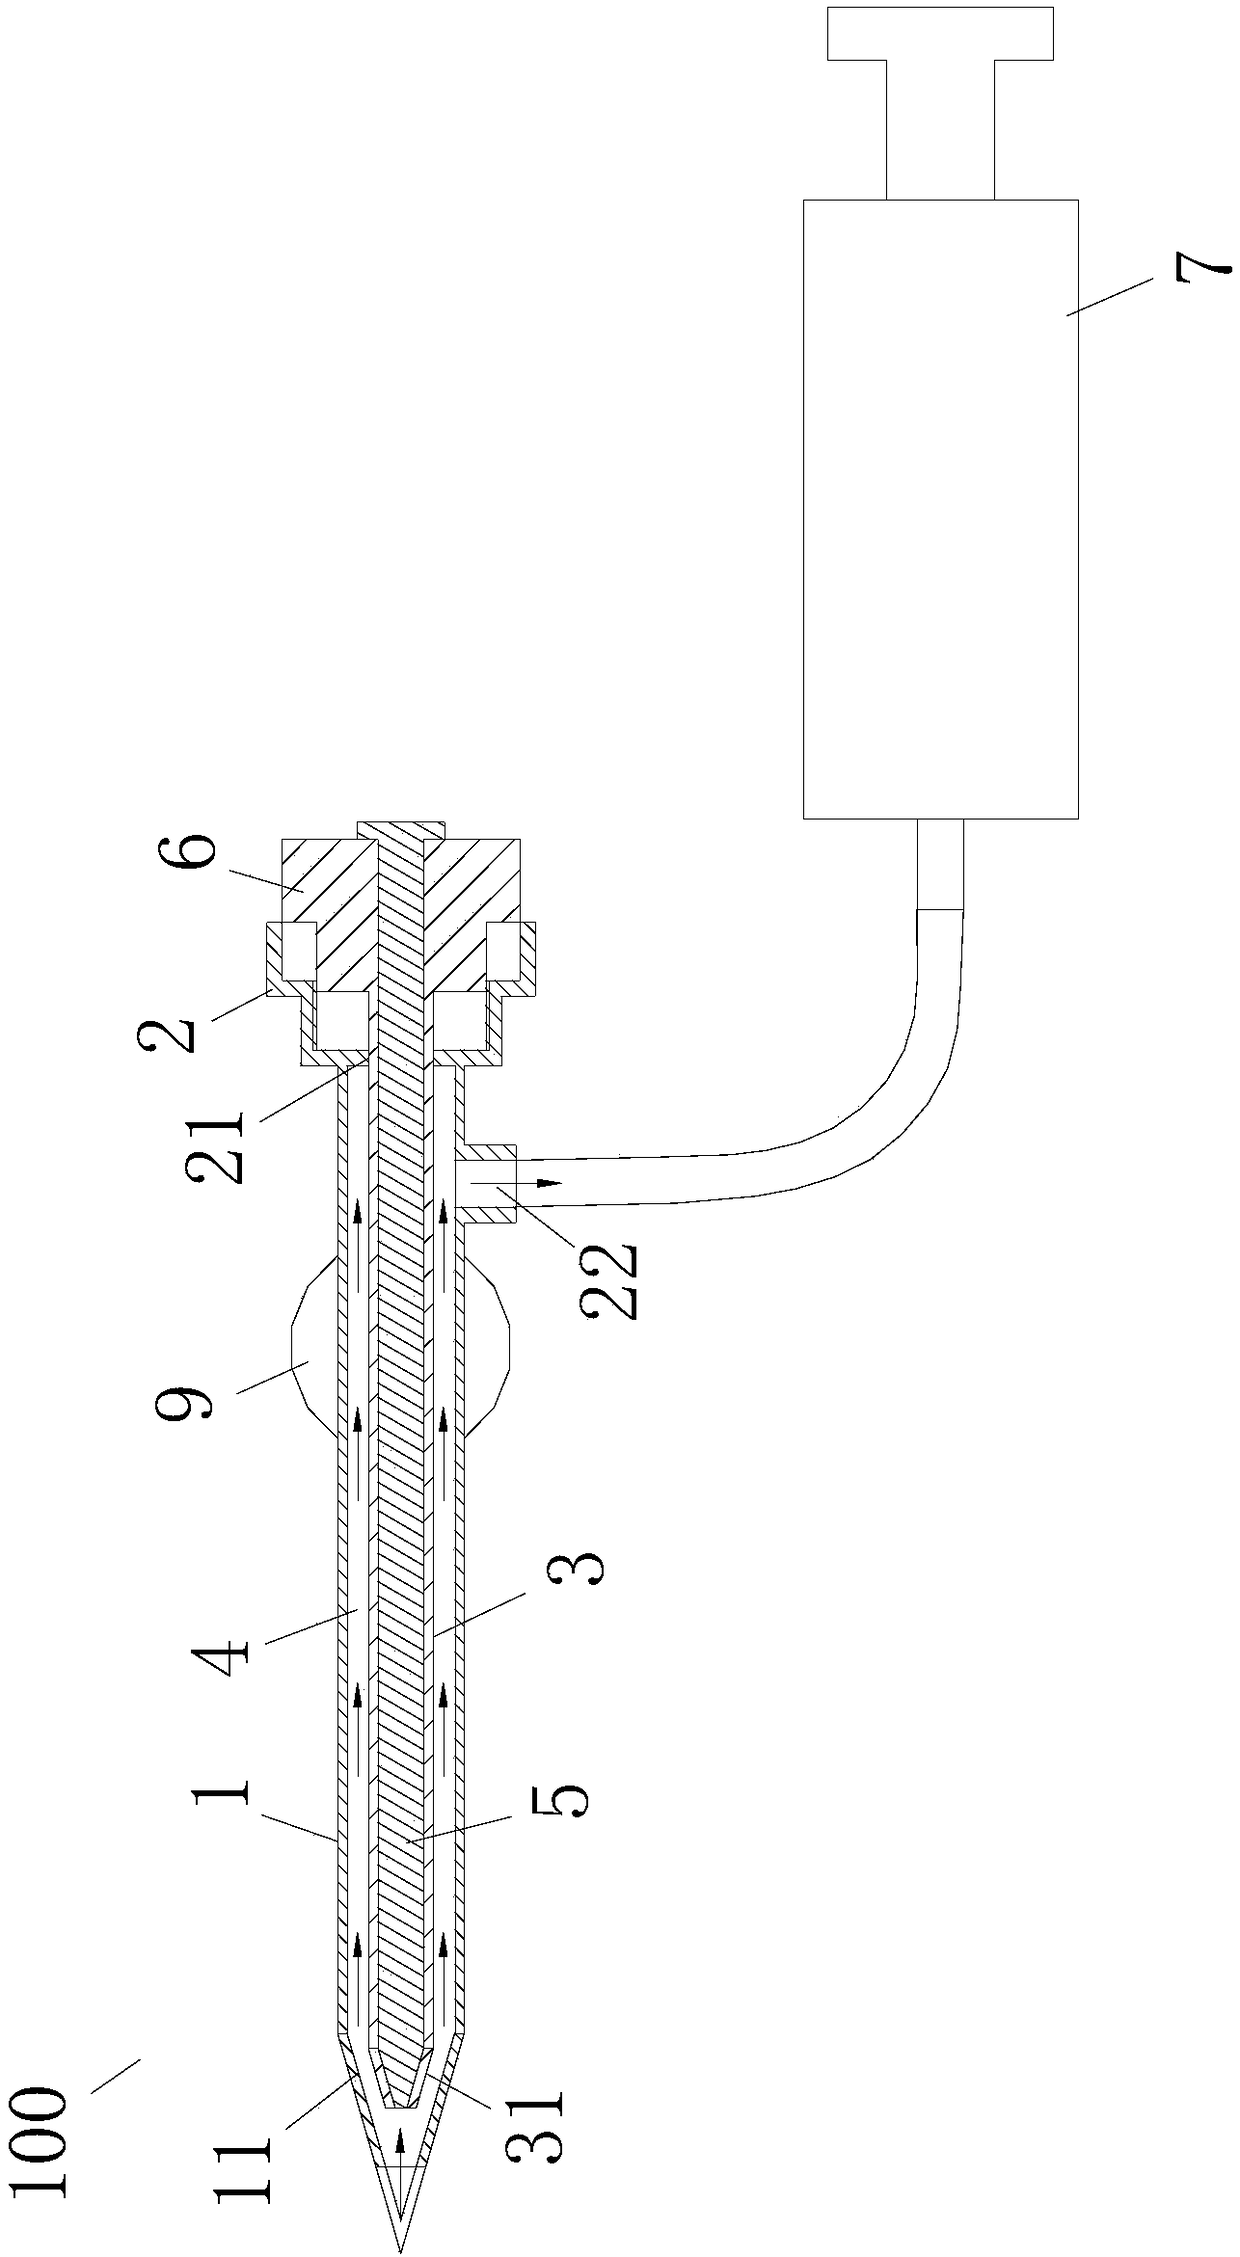 Medical mechanism for auripuncture and intratympanic injection